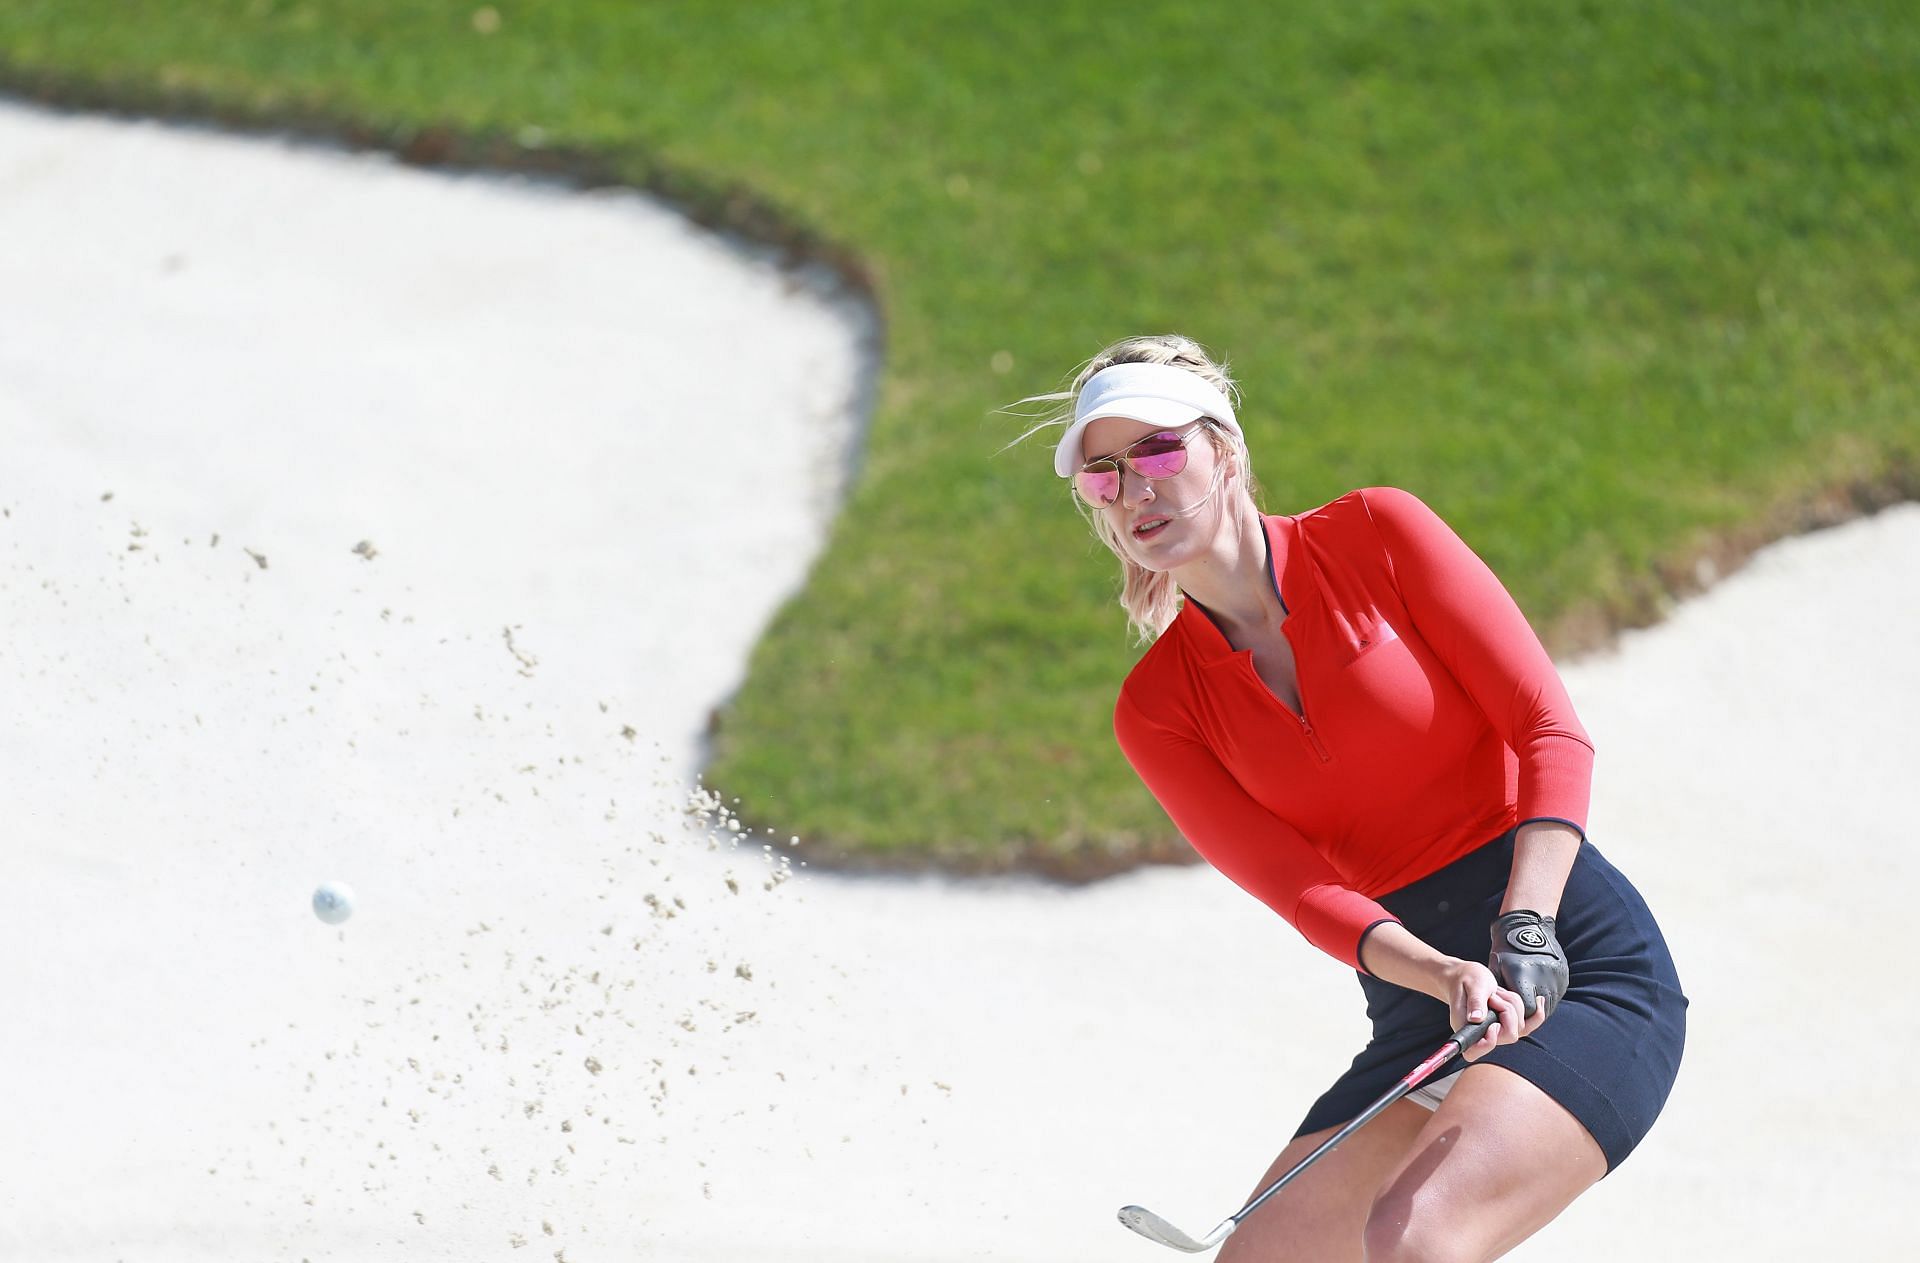 Paige Spiranac retired from professional golf in 2016